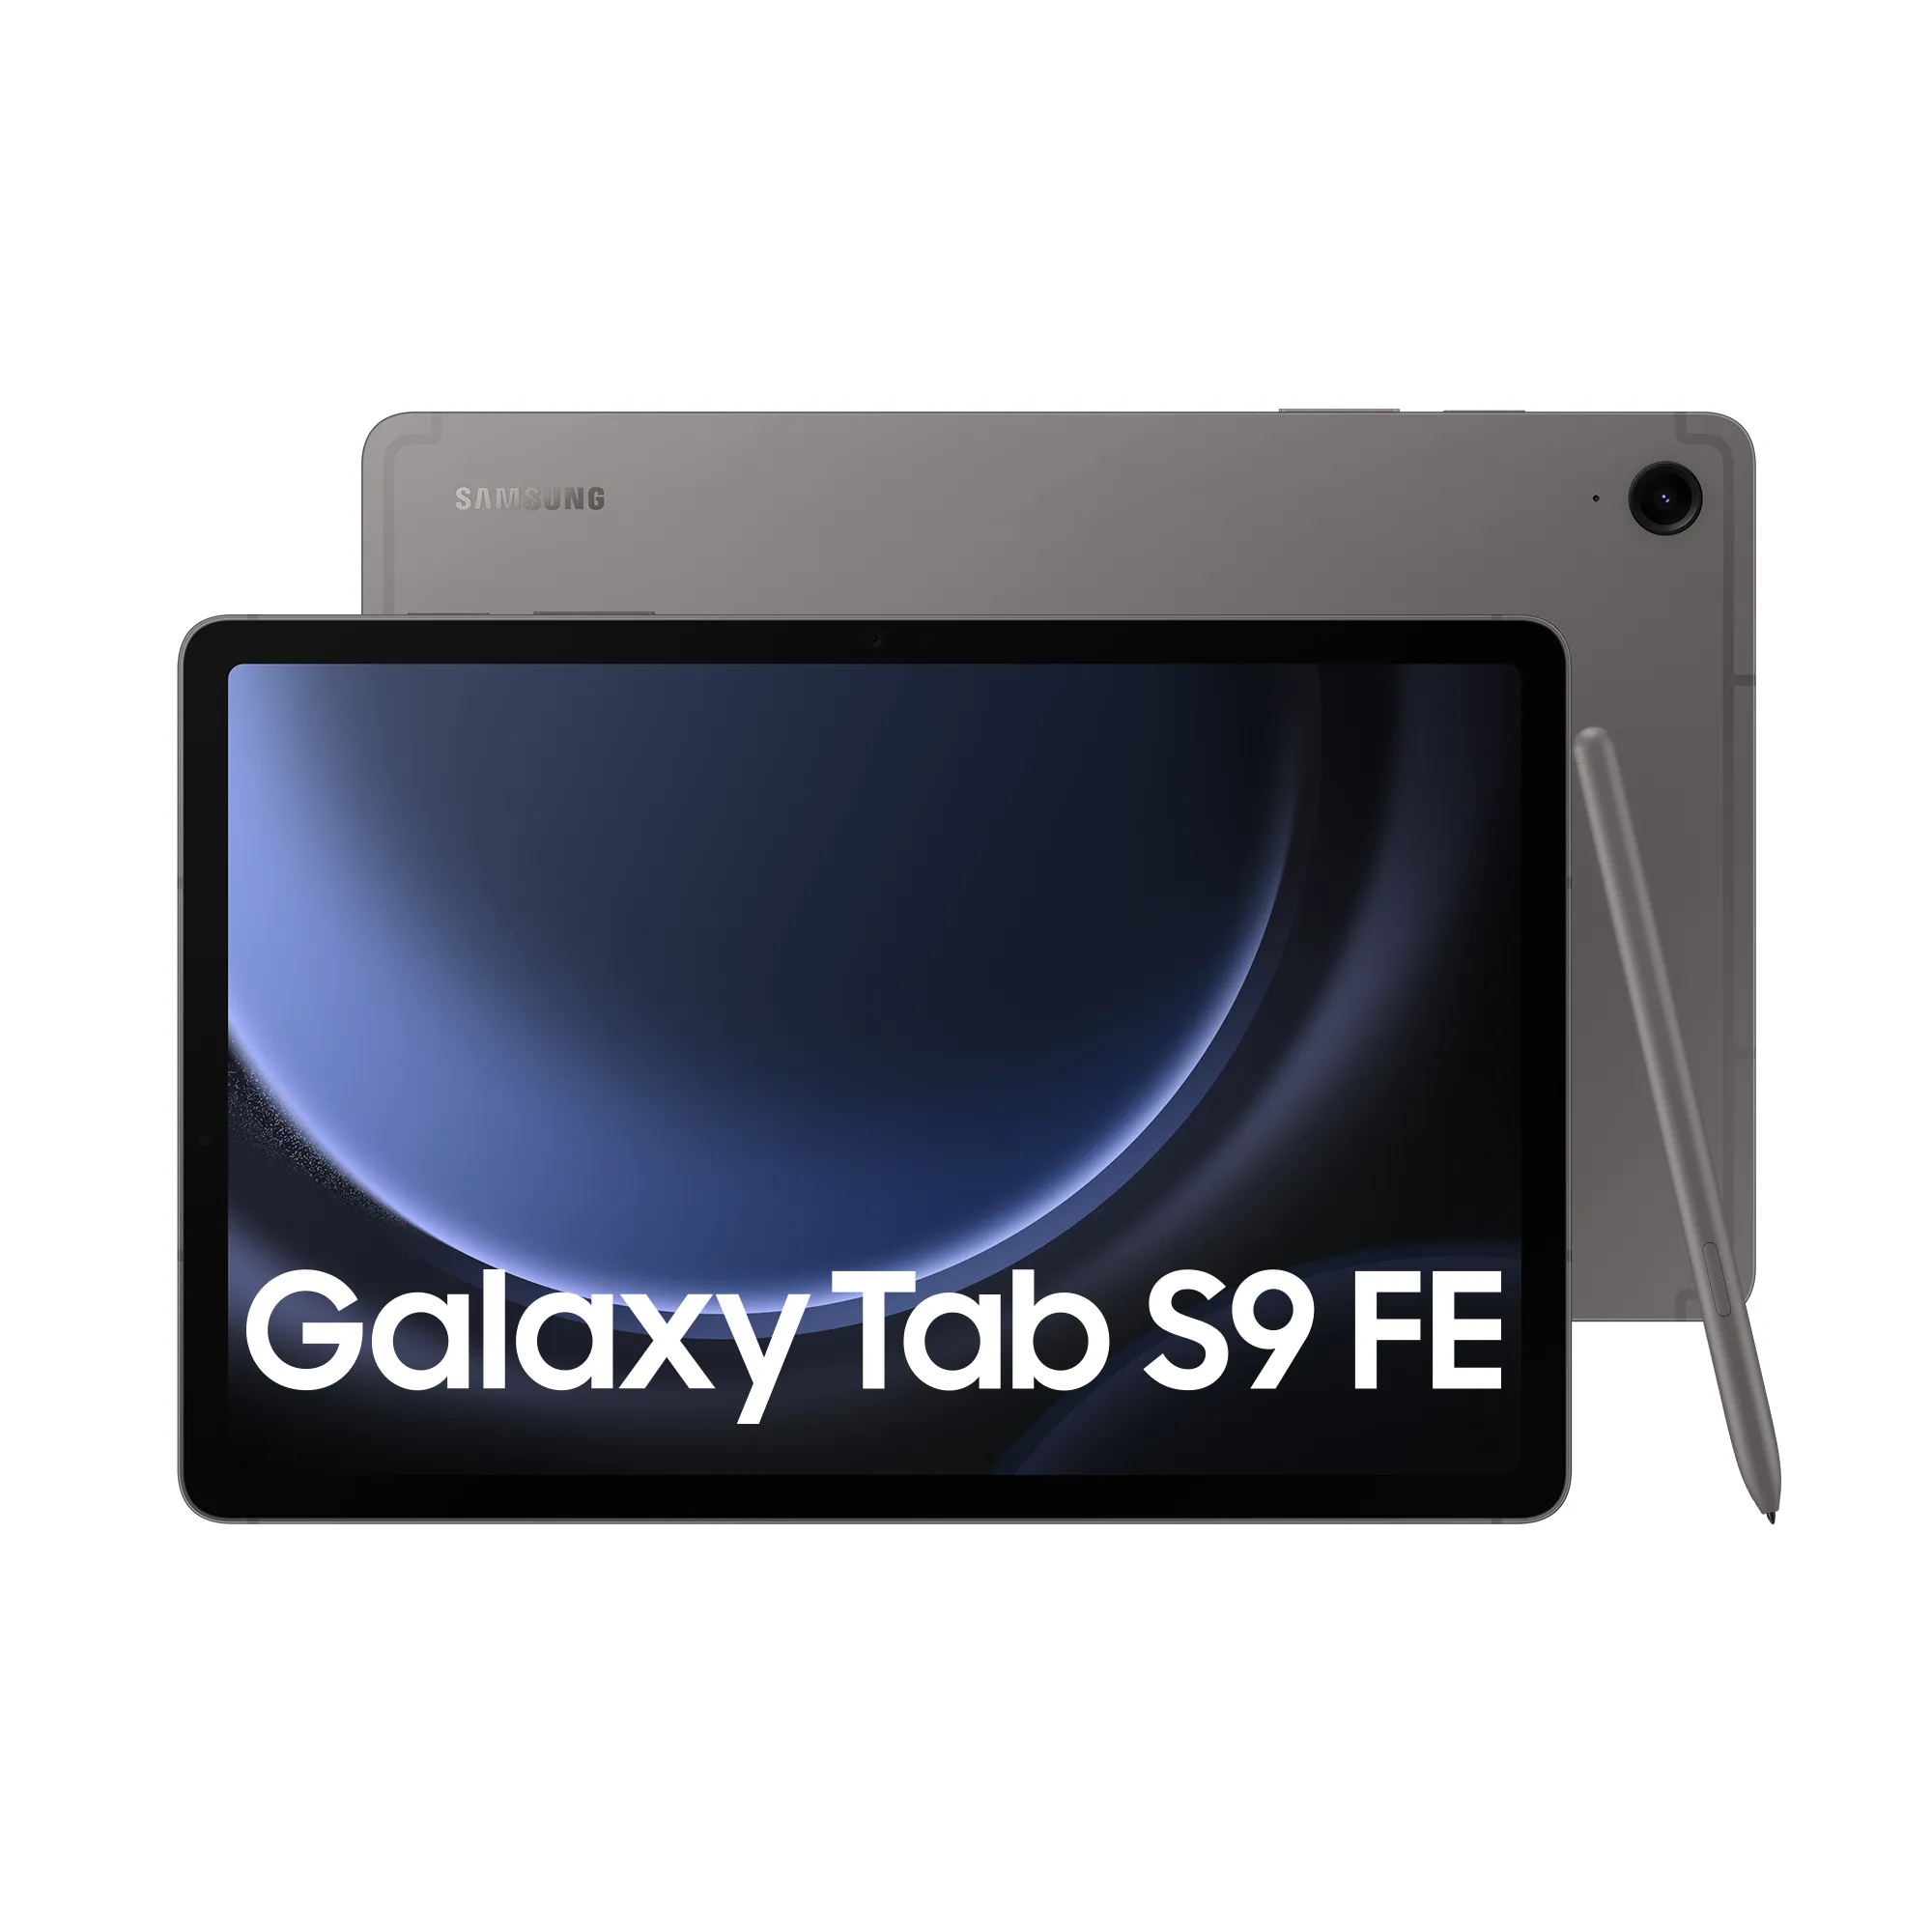 Achat Tablette Android SAMSUNG Galaxy Tab S9FE 10.9p 8Go 256Go 5G GRAY